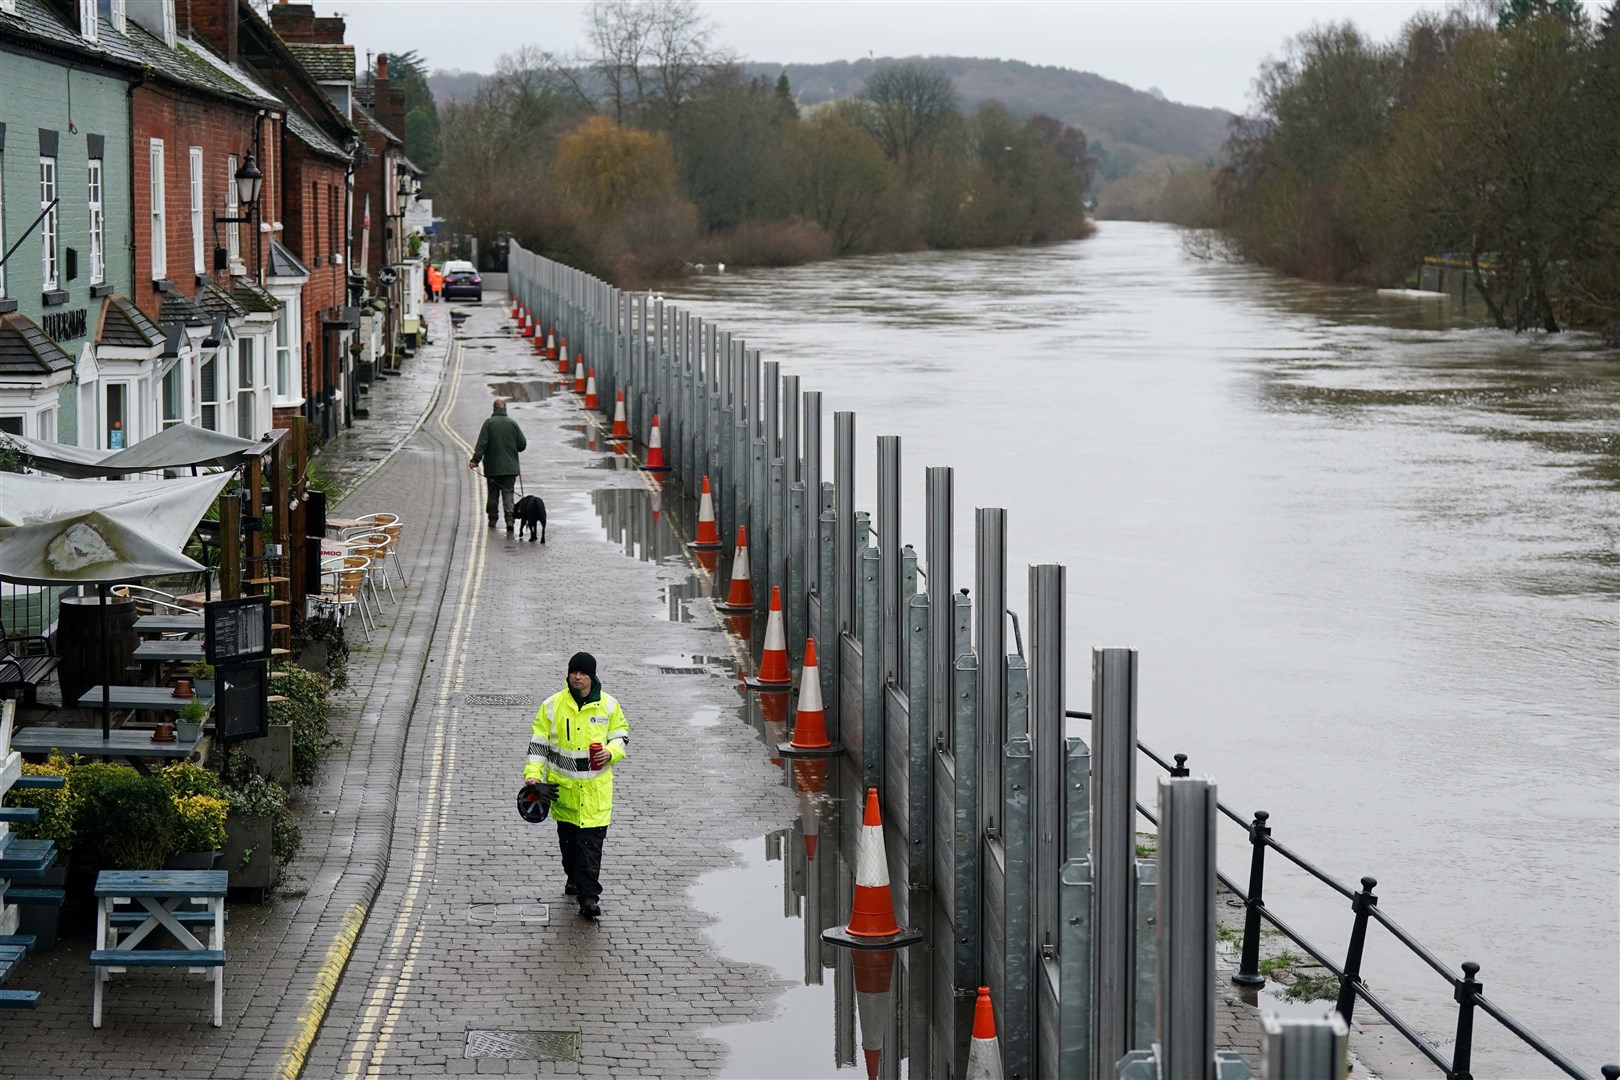 Flood defences being installed in Bewdley, Worcestershire, on Tuesday (Jacob King/PA)